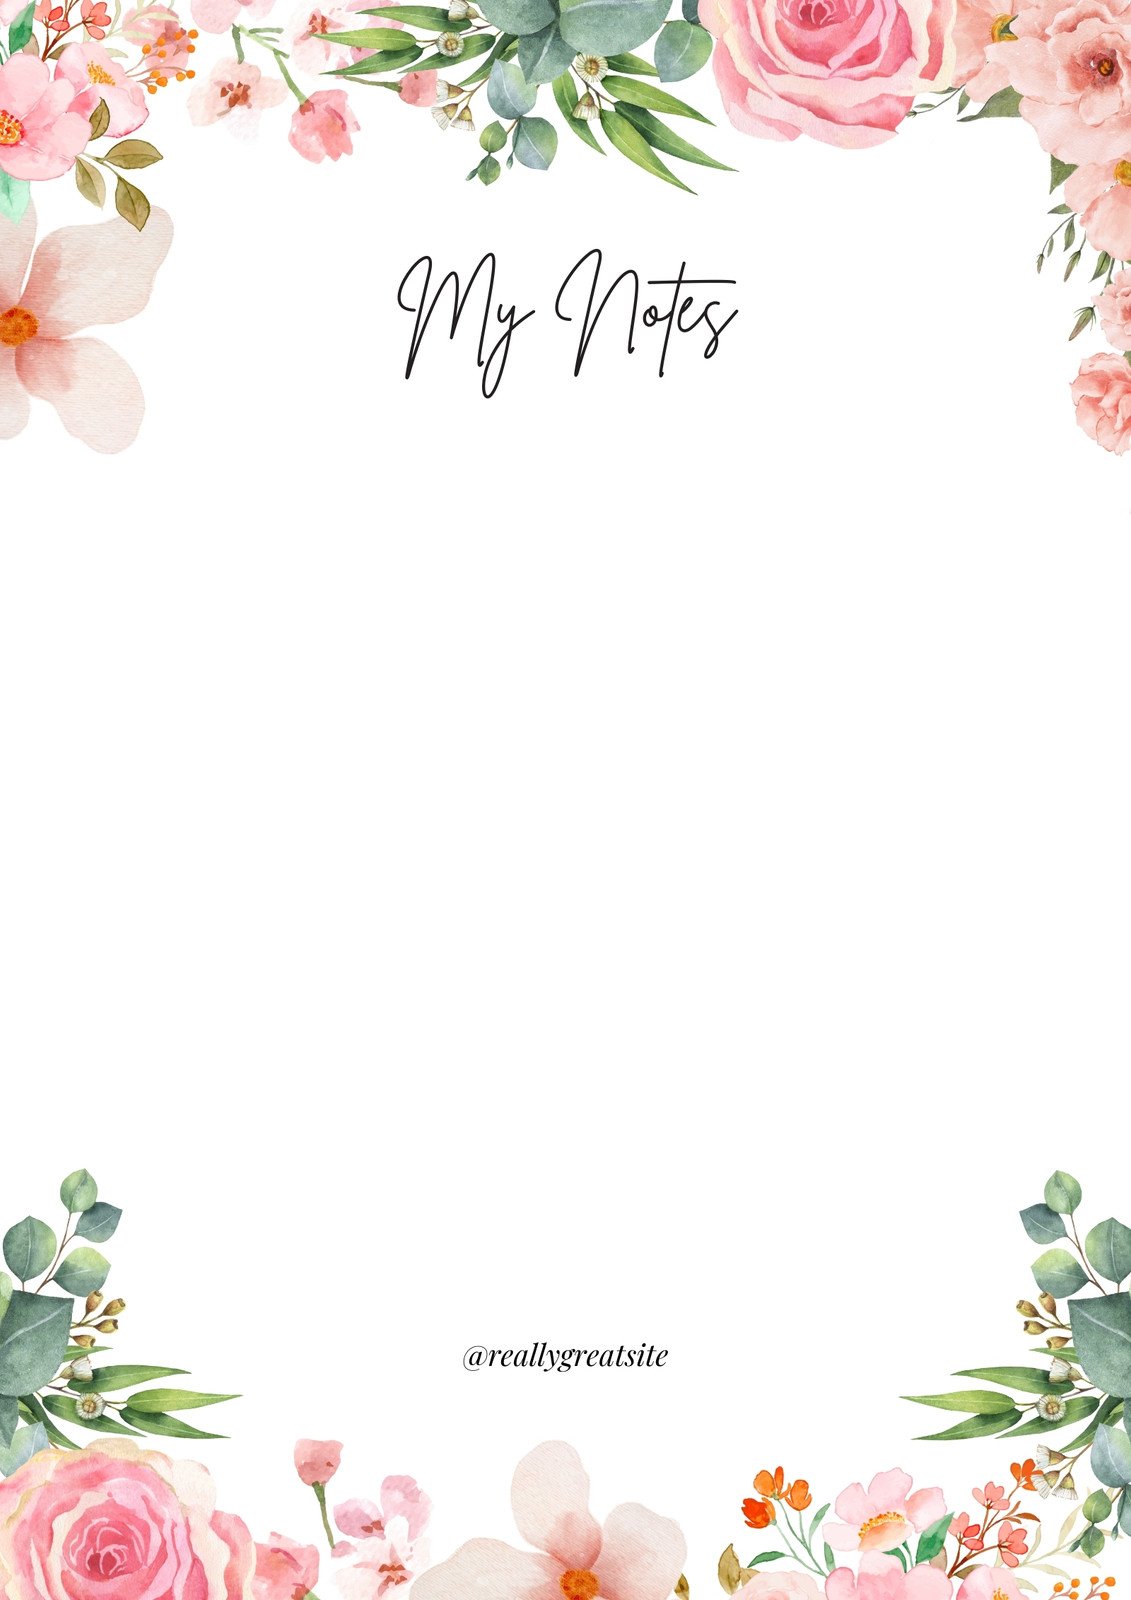 https://marketplace.canva.com/EAFiisK_iPo/1/0/1131w/canva-pink-green-floral-my-notes-a4-document-eixcayMlJwo.jpg